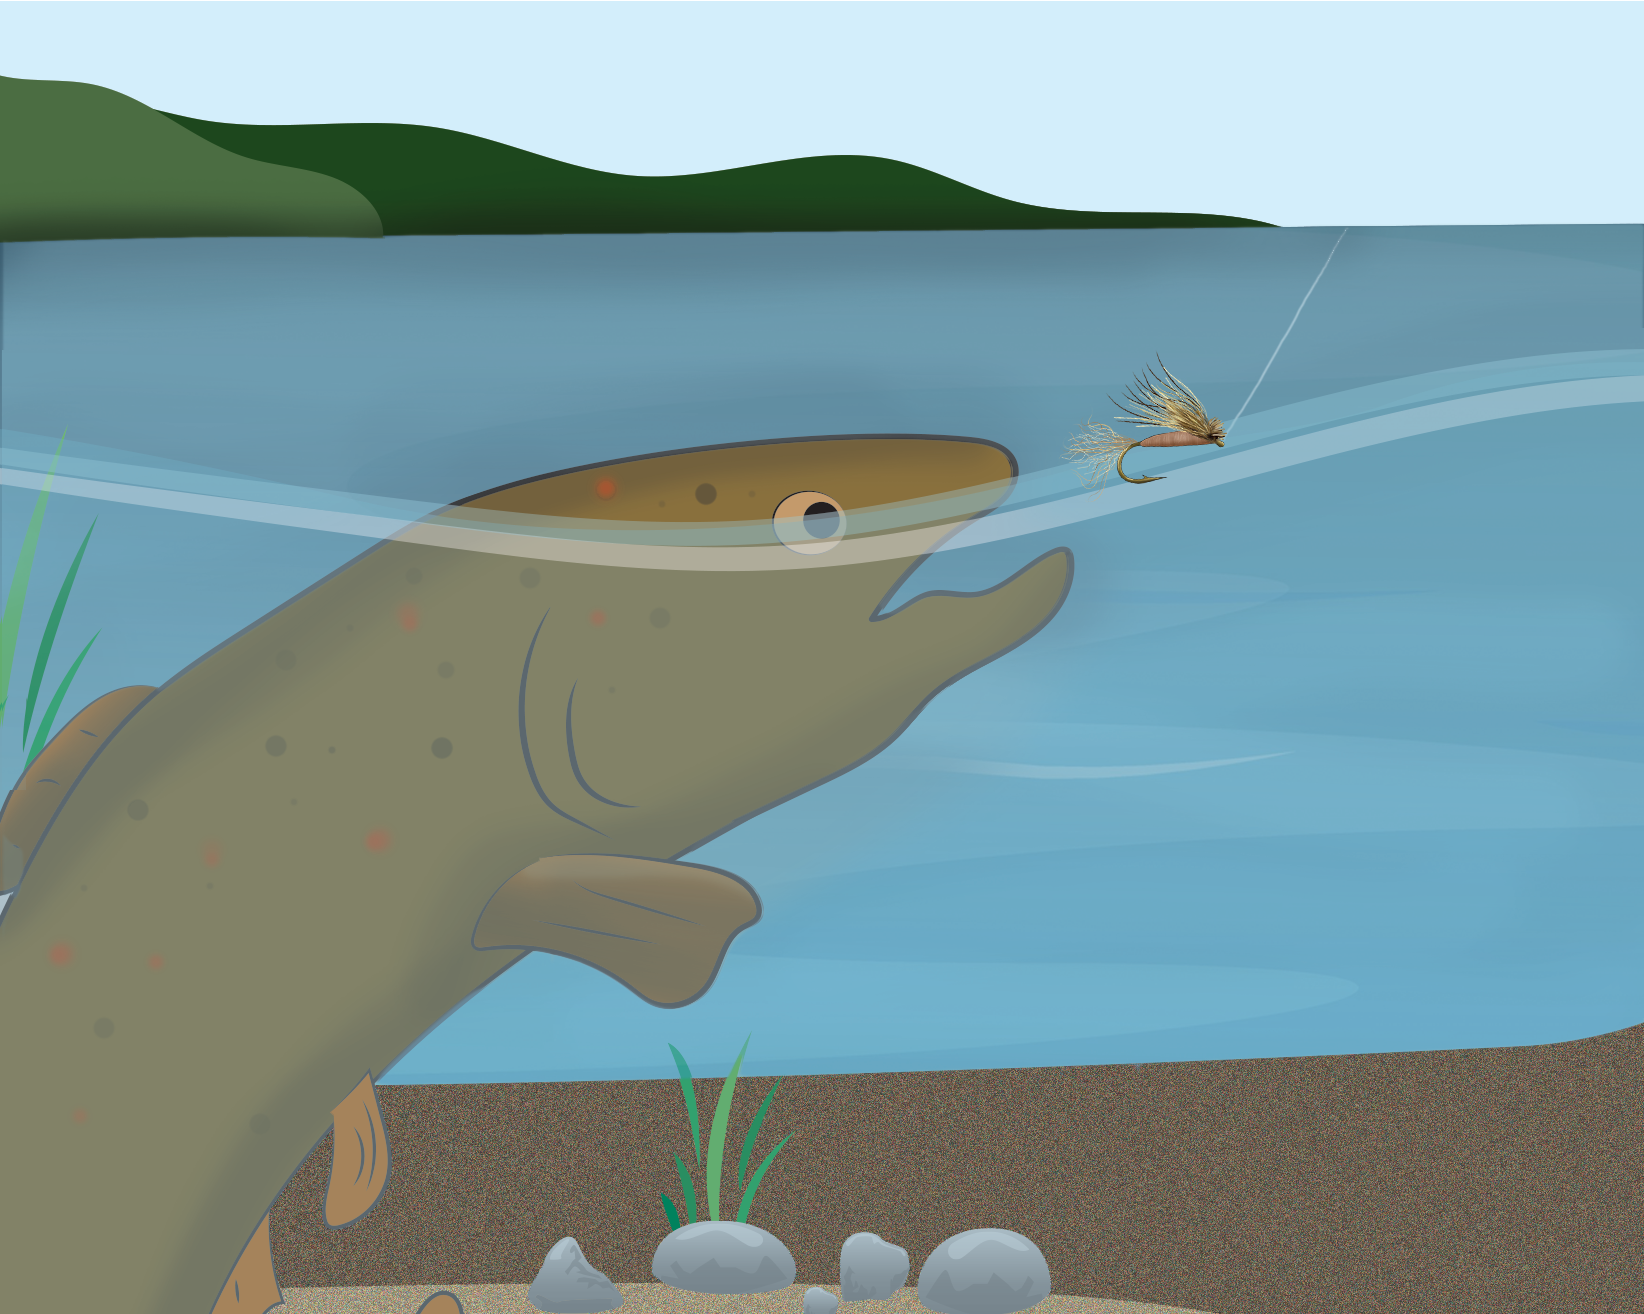 Diagram of a fish biting a dry fly underwater